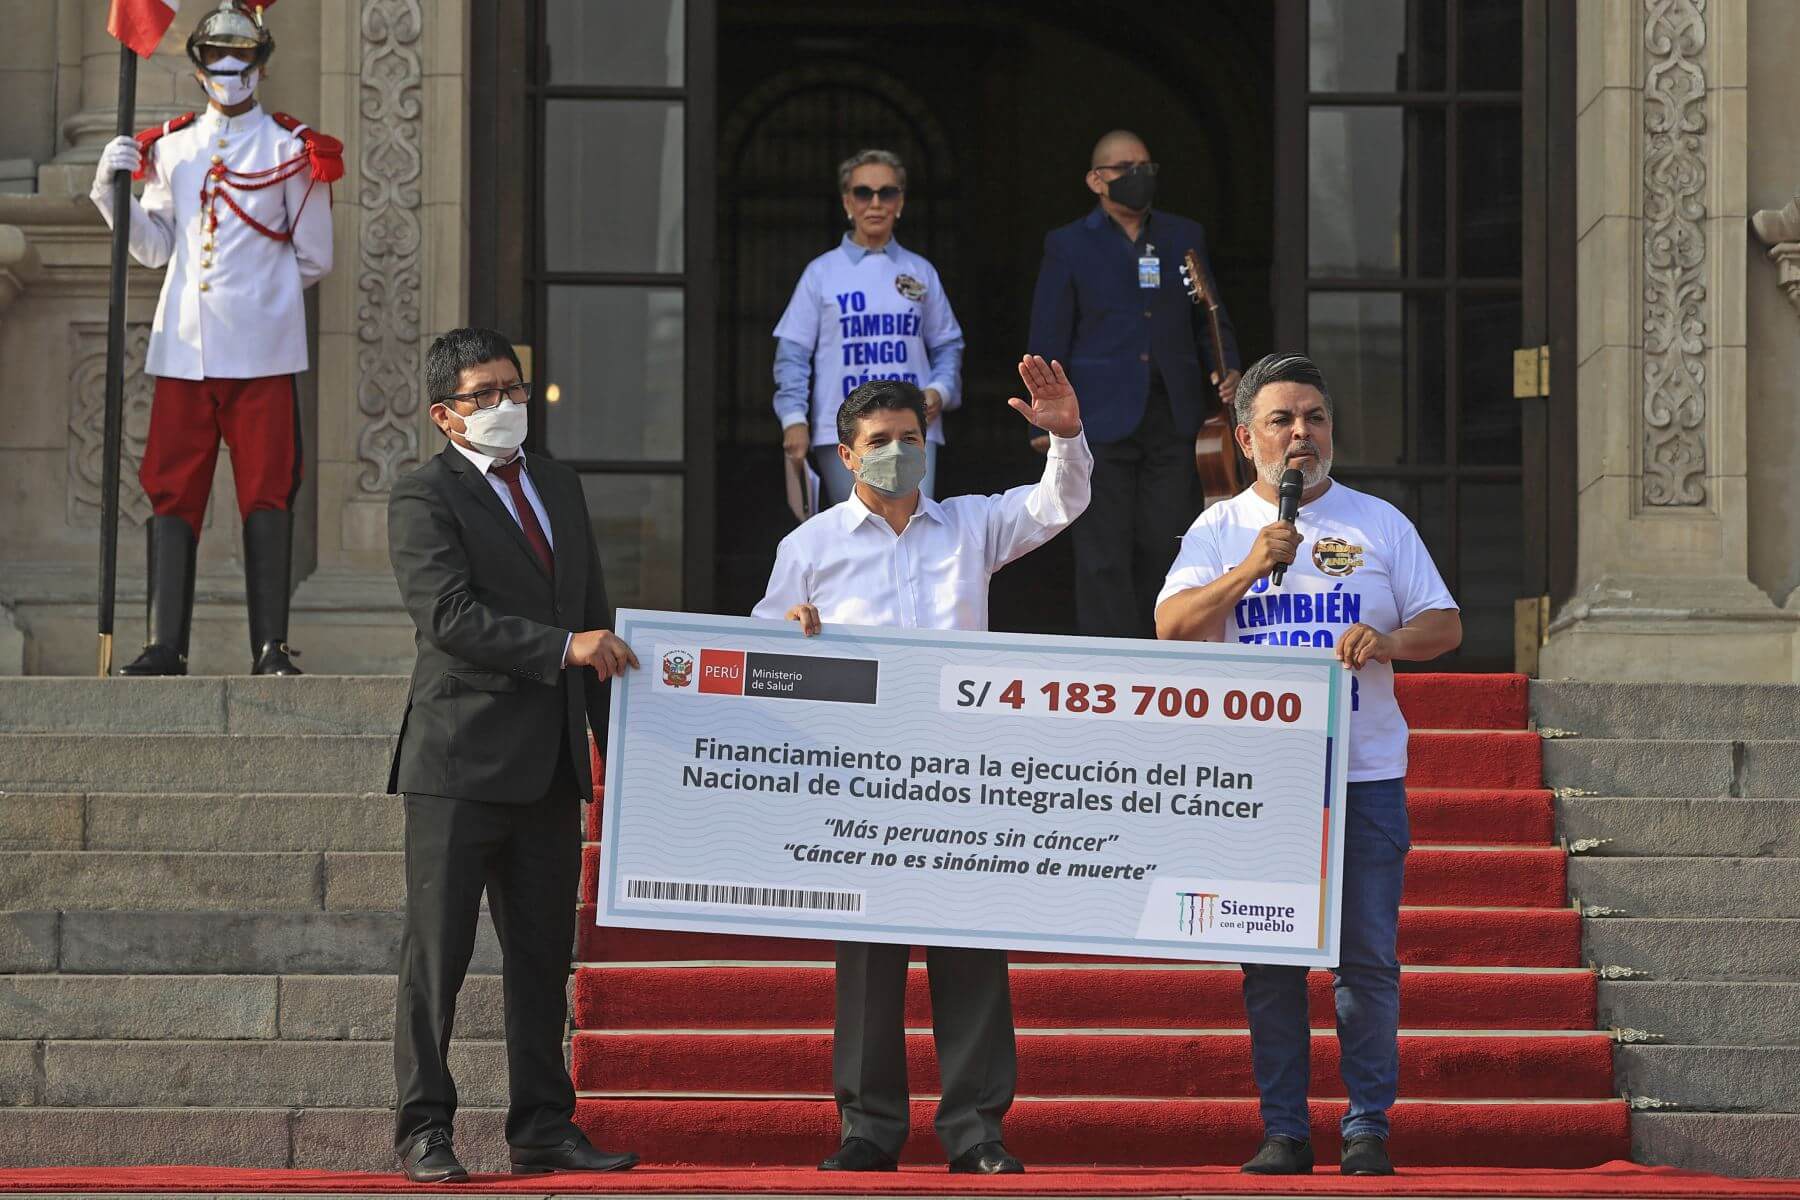 Peru’s Congress investigating President Castillo’s empty promise to young cancer patients 